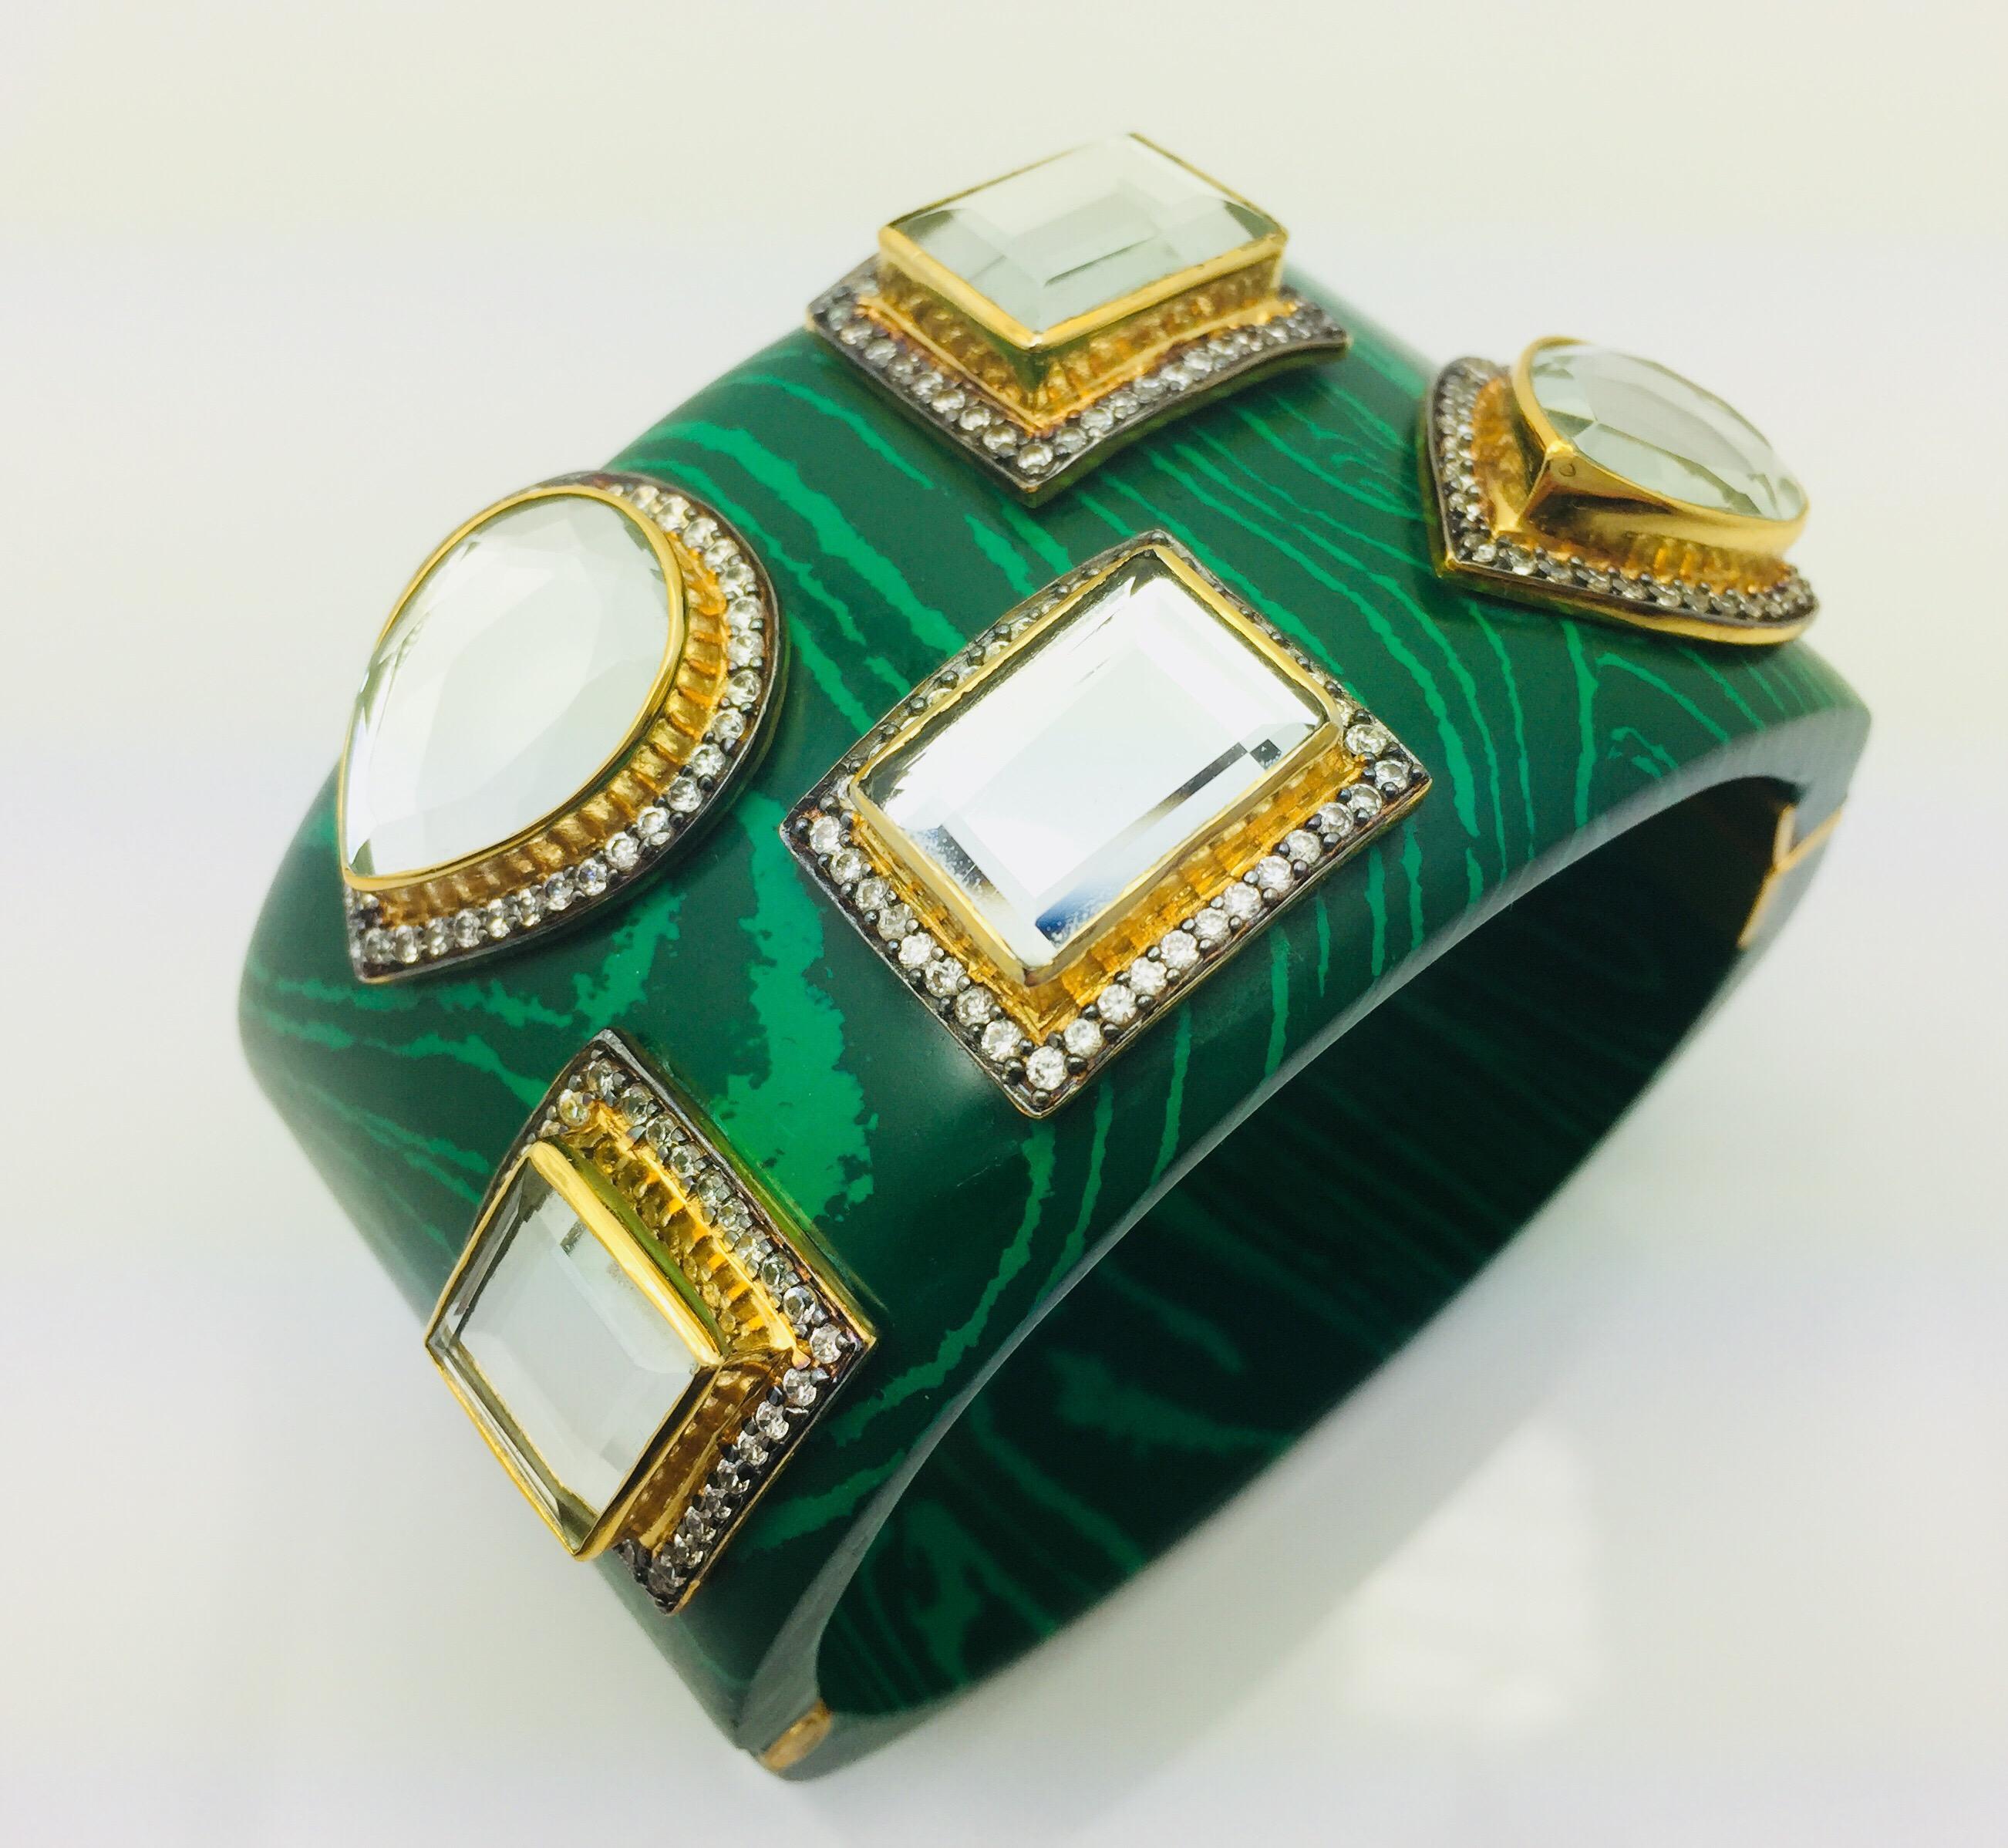 The smooth malachite resin bracelet provides a stunning backdrop for the various shapes of light reflective mirror stones, each of which has its own frame of dazzling CZs. Bracelet has a hinged, box tab closure.

Available in Black Onyx and